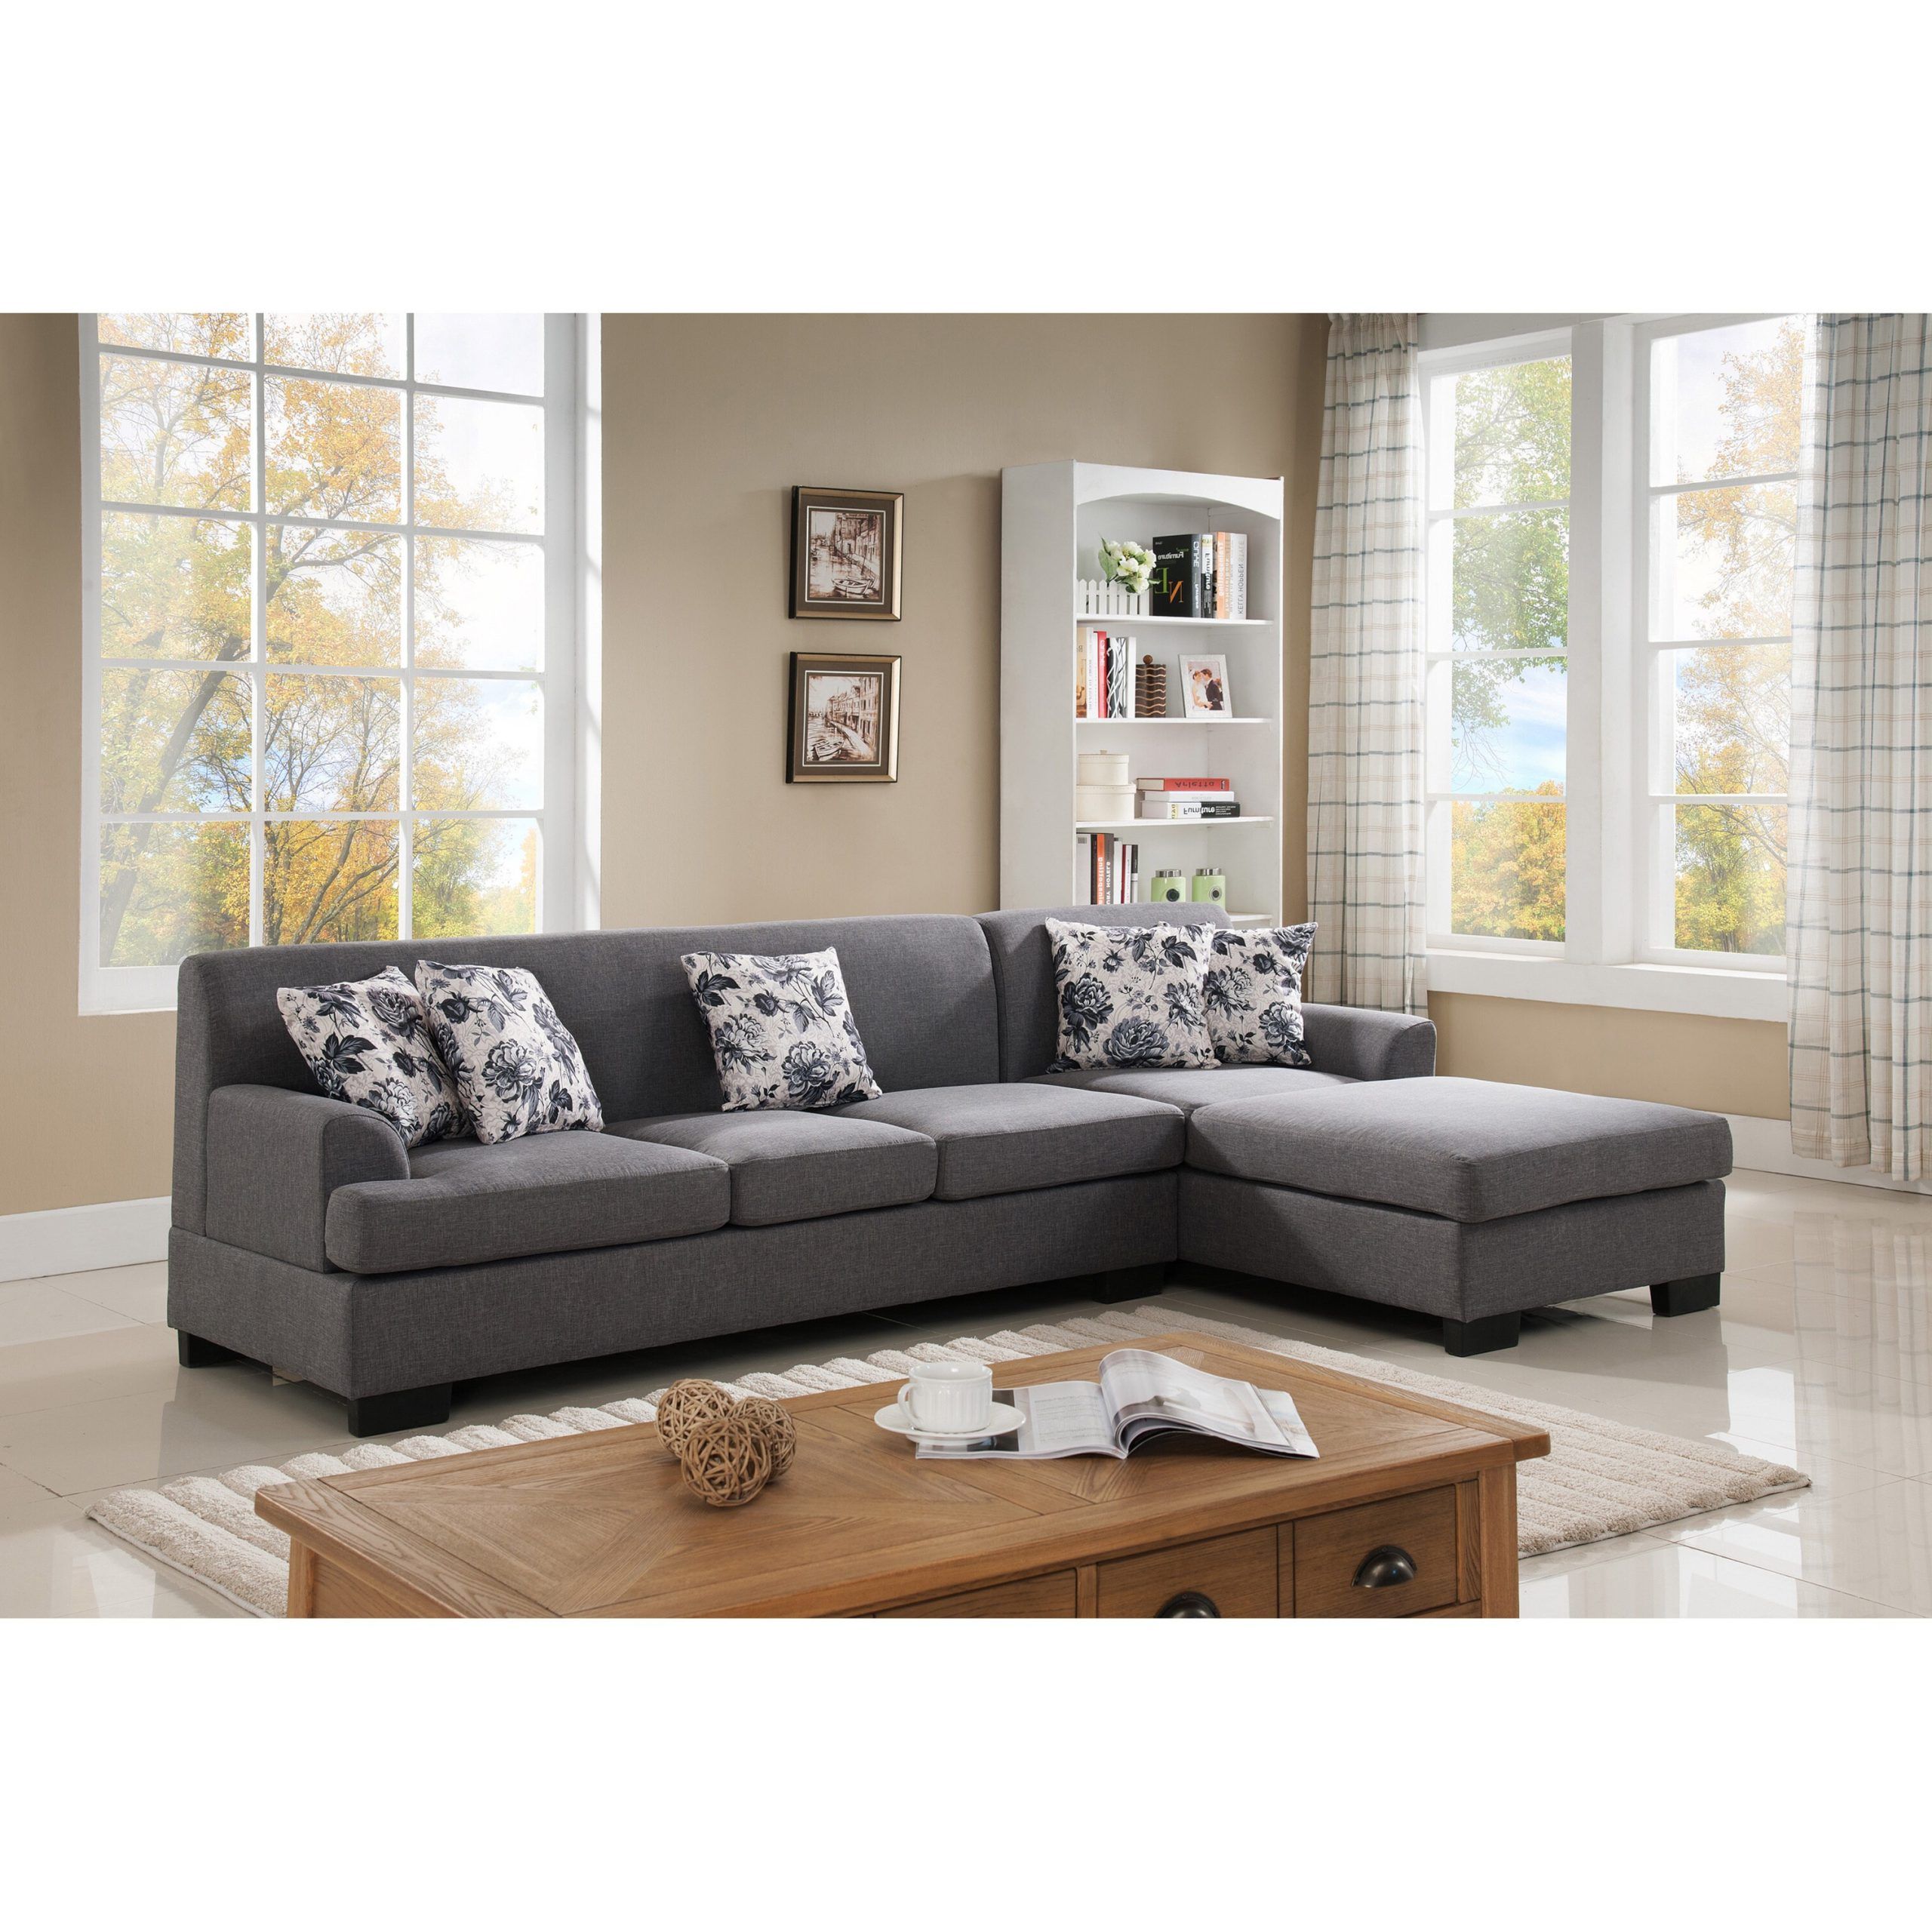 Well Liked Reversible Sectional Sofas Within Shop Allen Modern Fabric Reversible Sectional Sofa Set – Free Shipping (View 8 of 15)